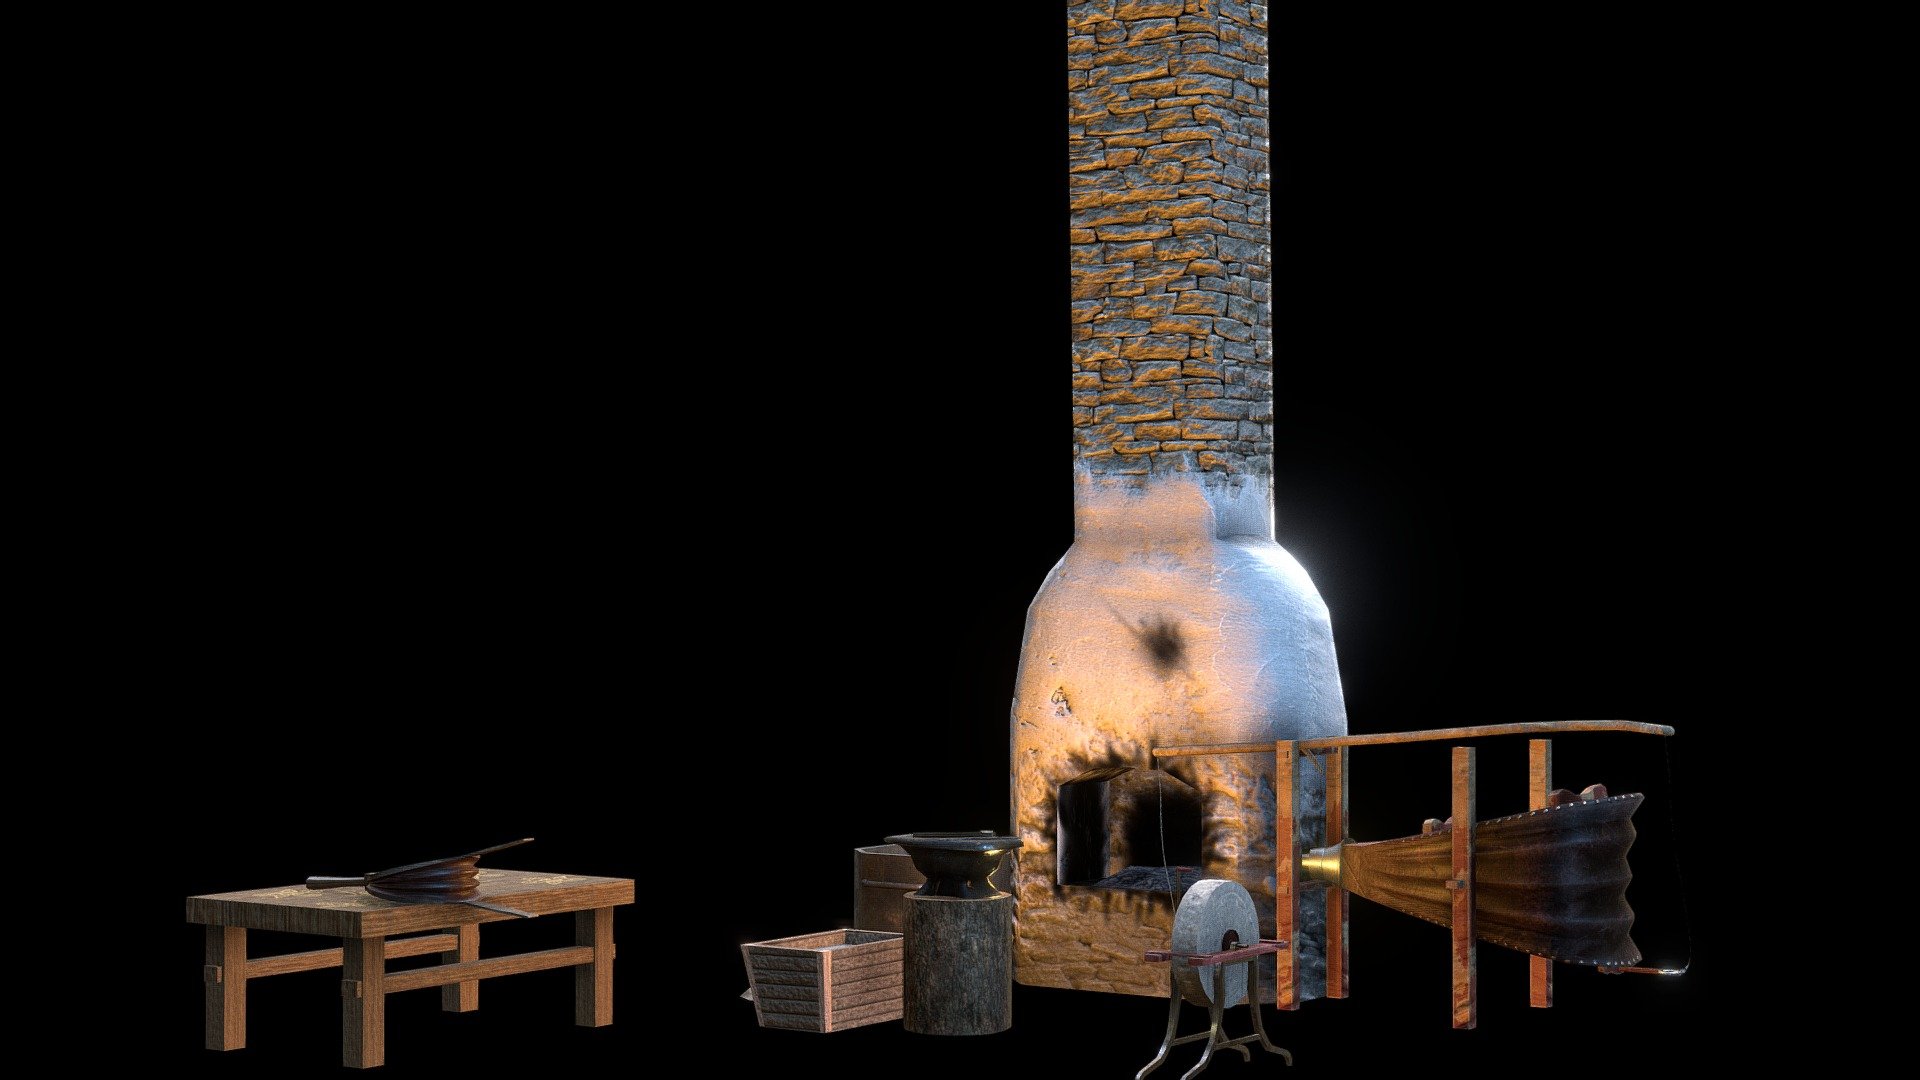 This is my vision of fantasy forge 3d model